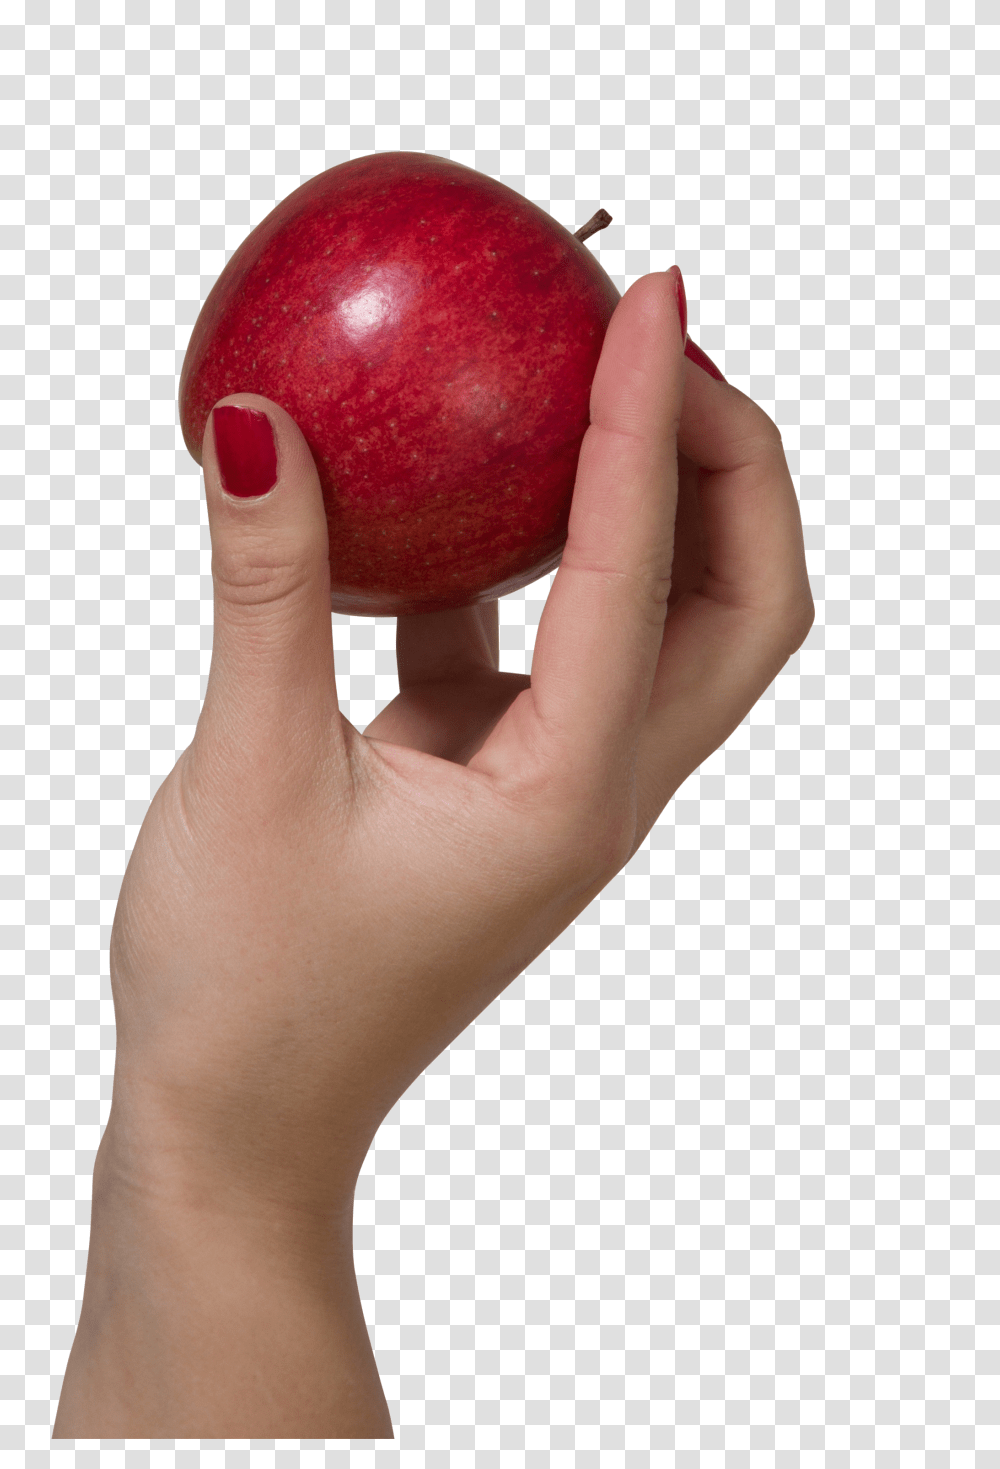 A Hand Holding Red Apple Image Apple In Hand, Fruit, Plant, Food, Person Transparent Png